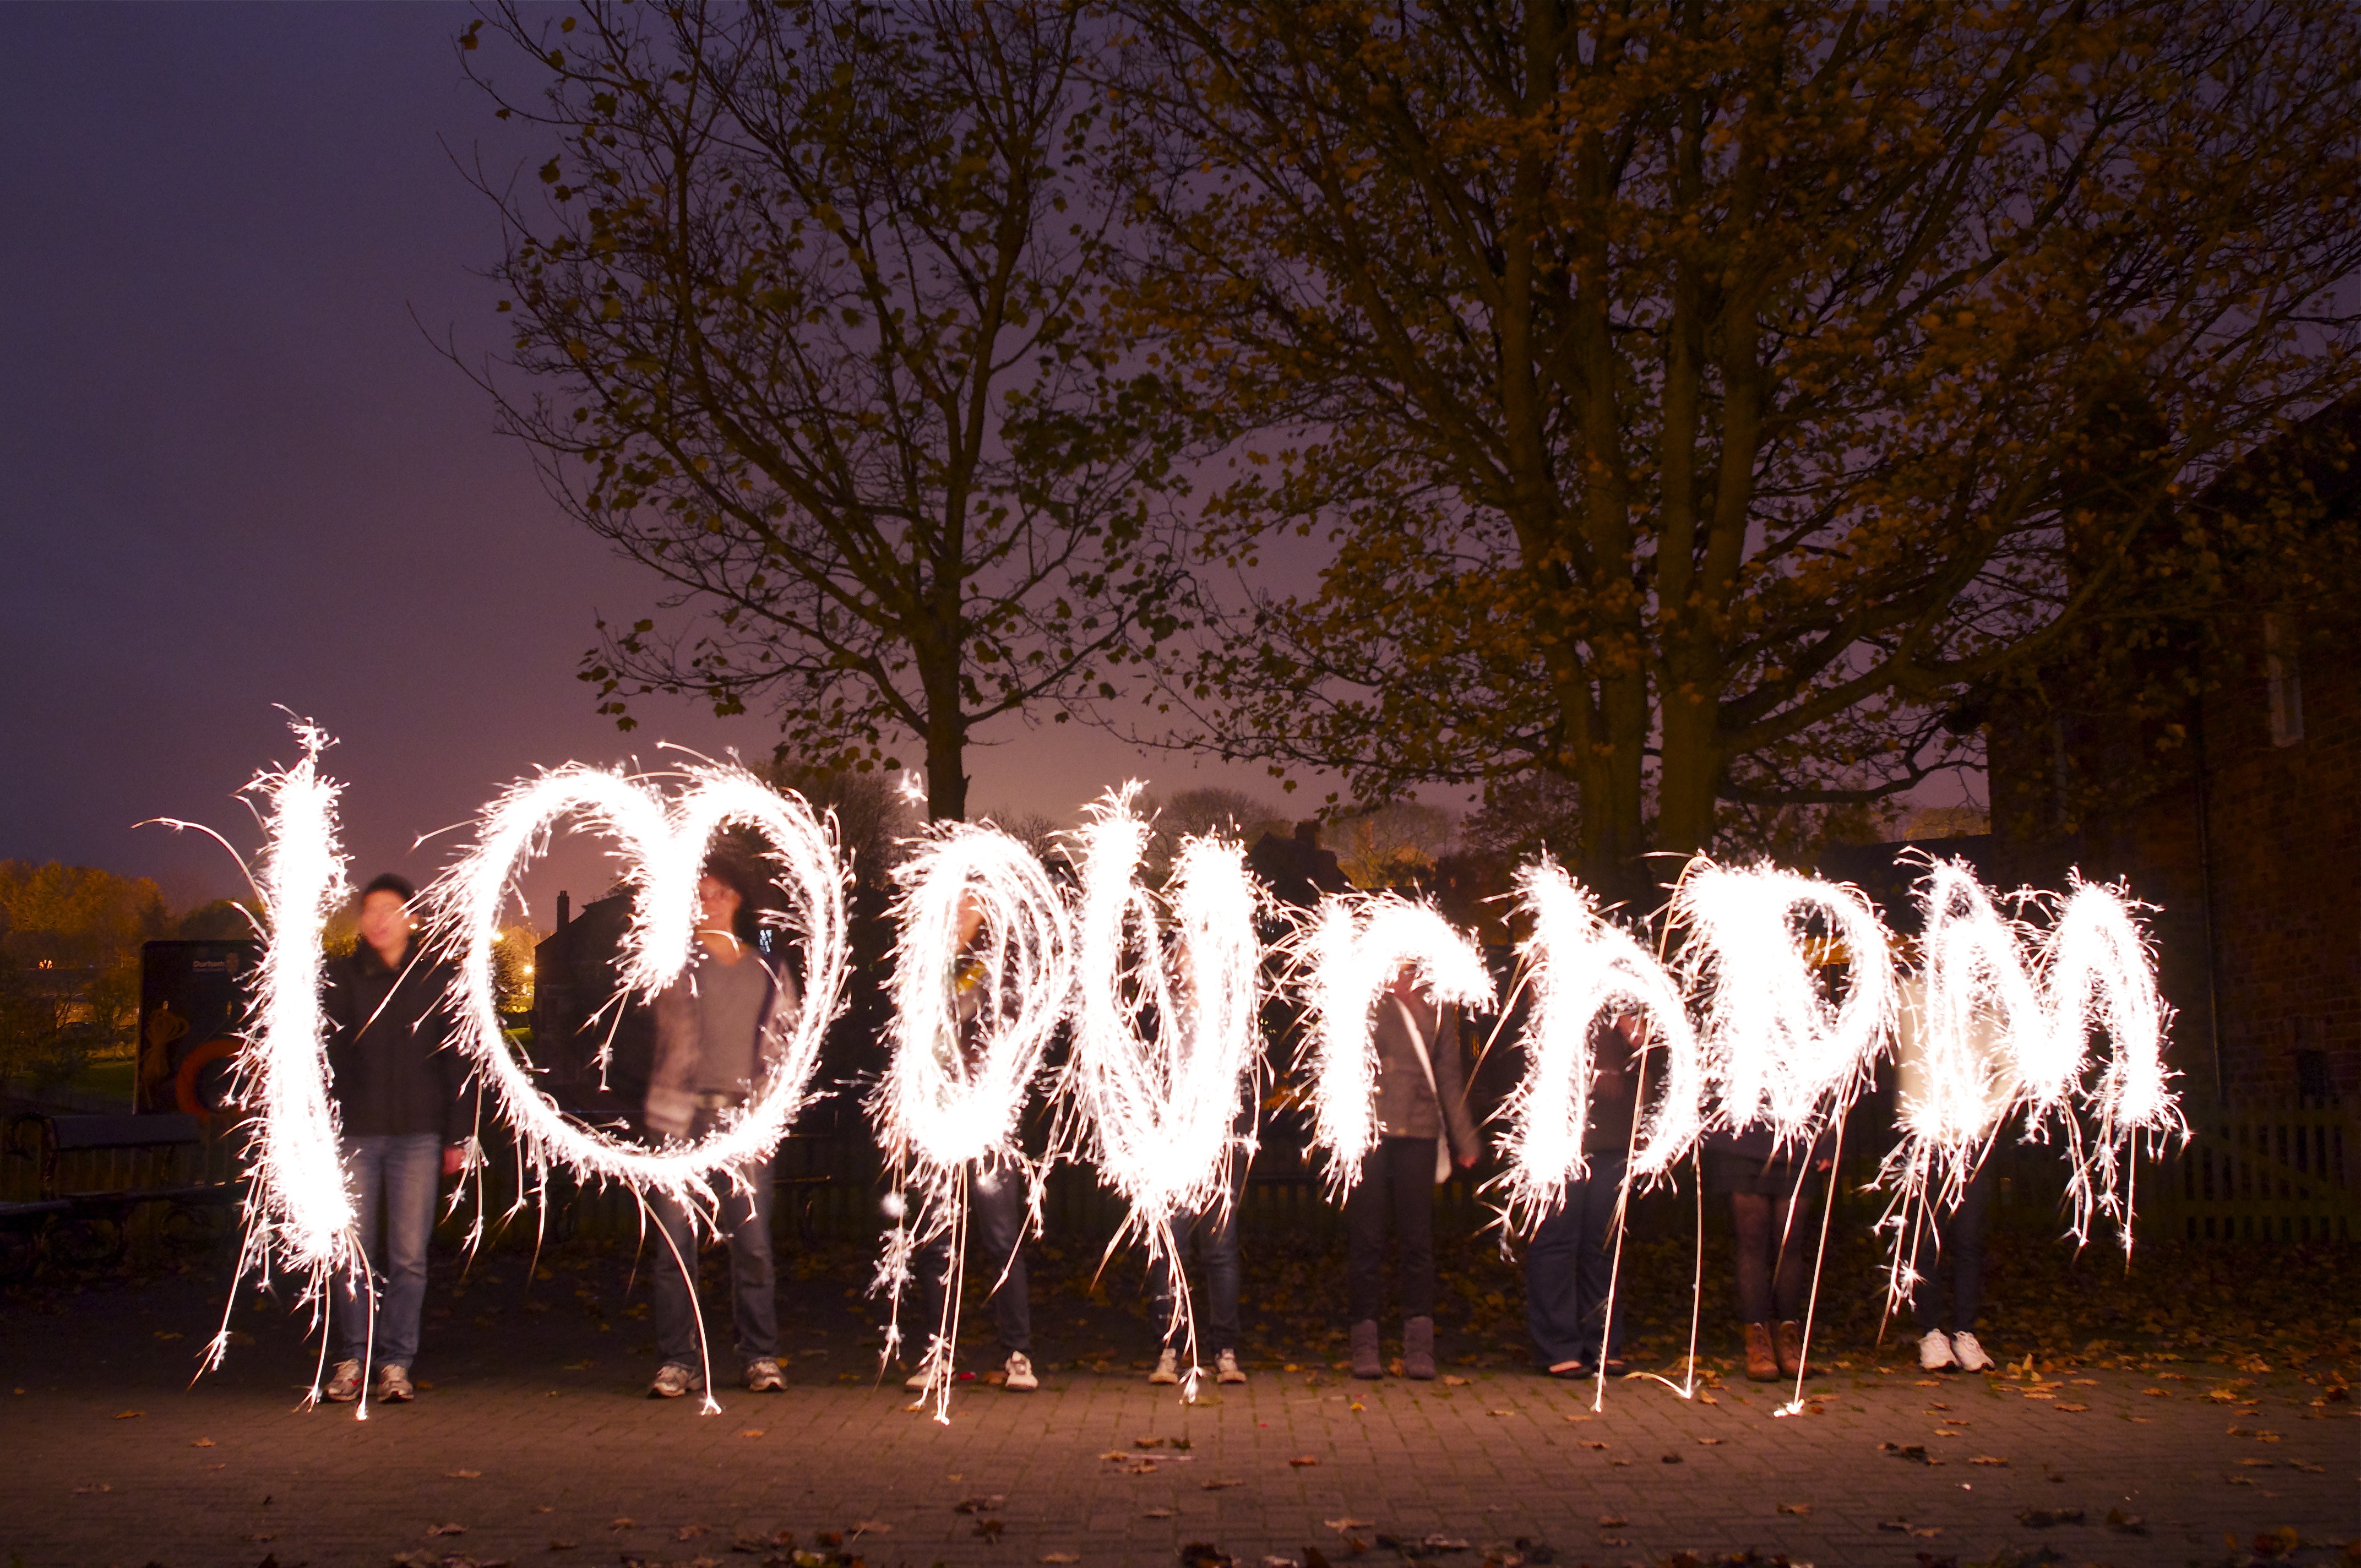 A picture of people drawing letters with sparklers to spell a word